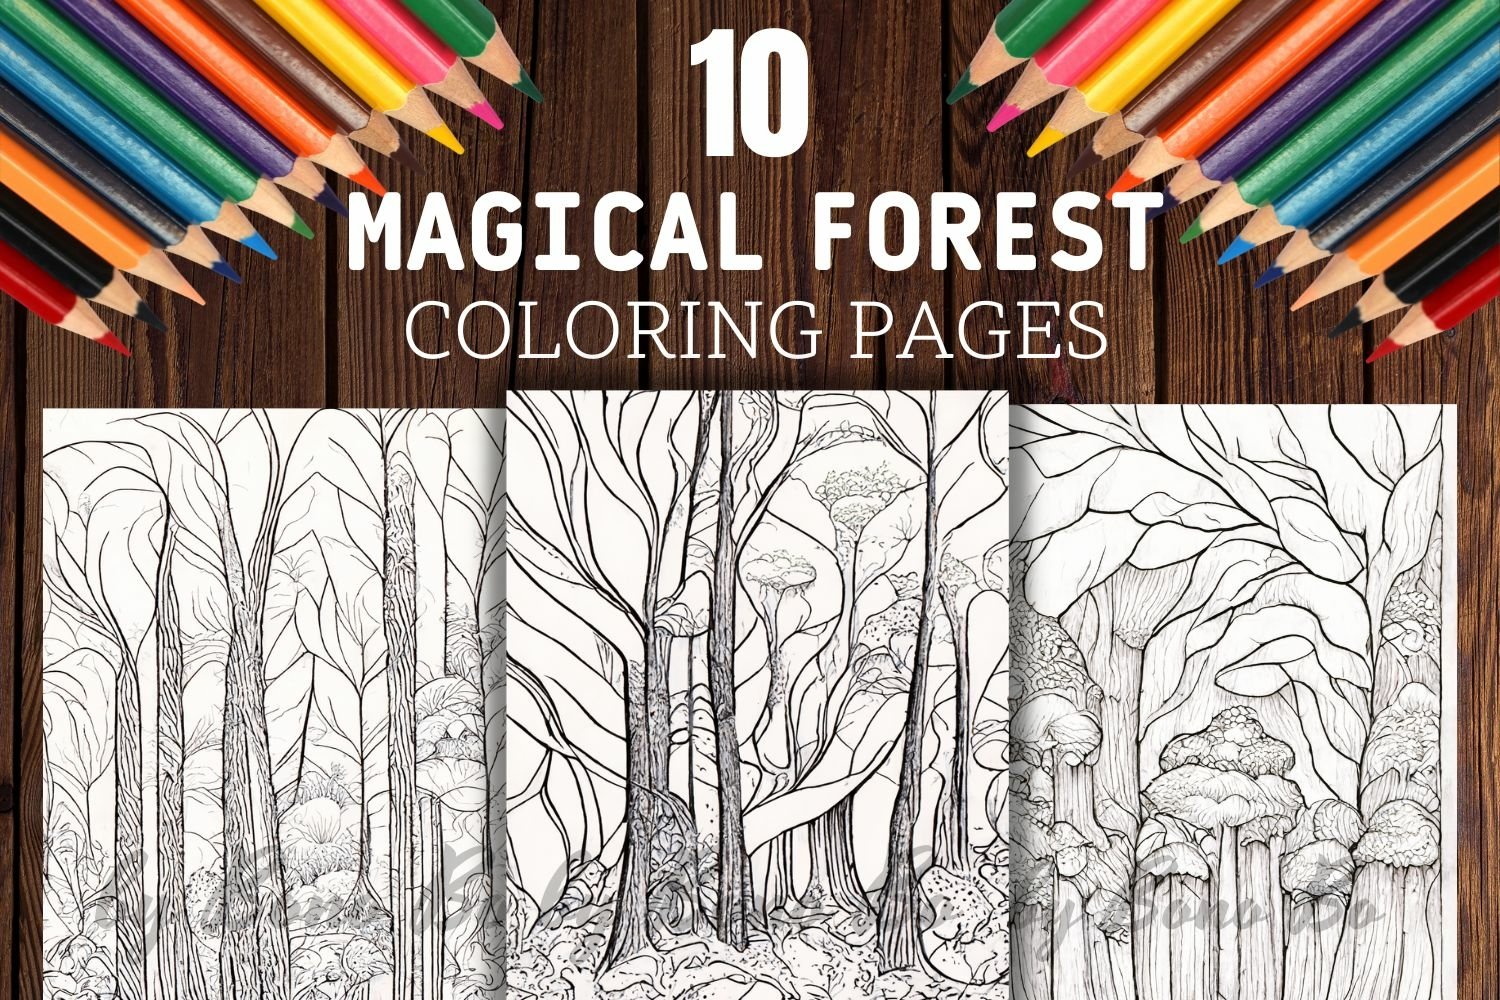 Magical forest fantasy art coloring pages